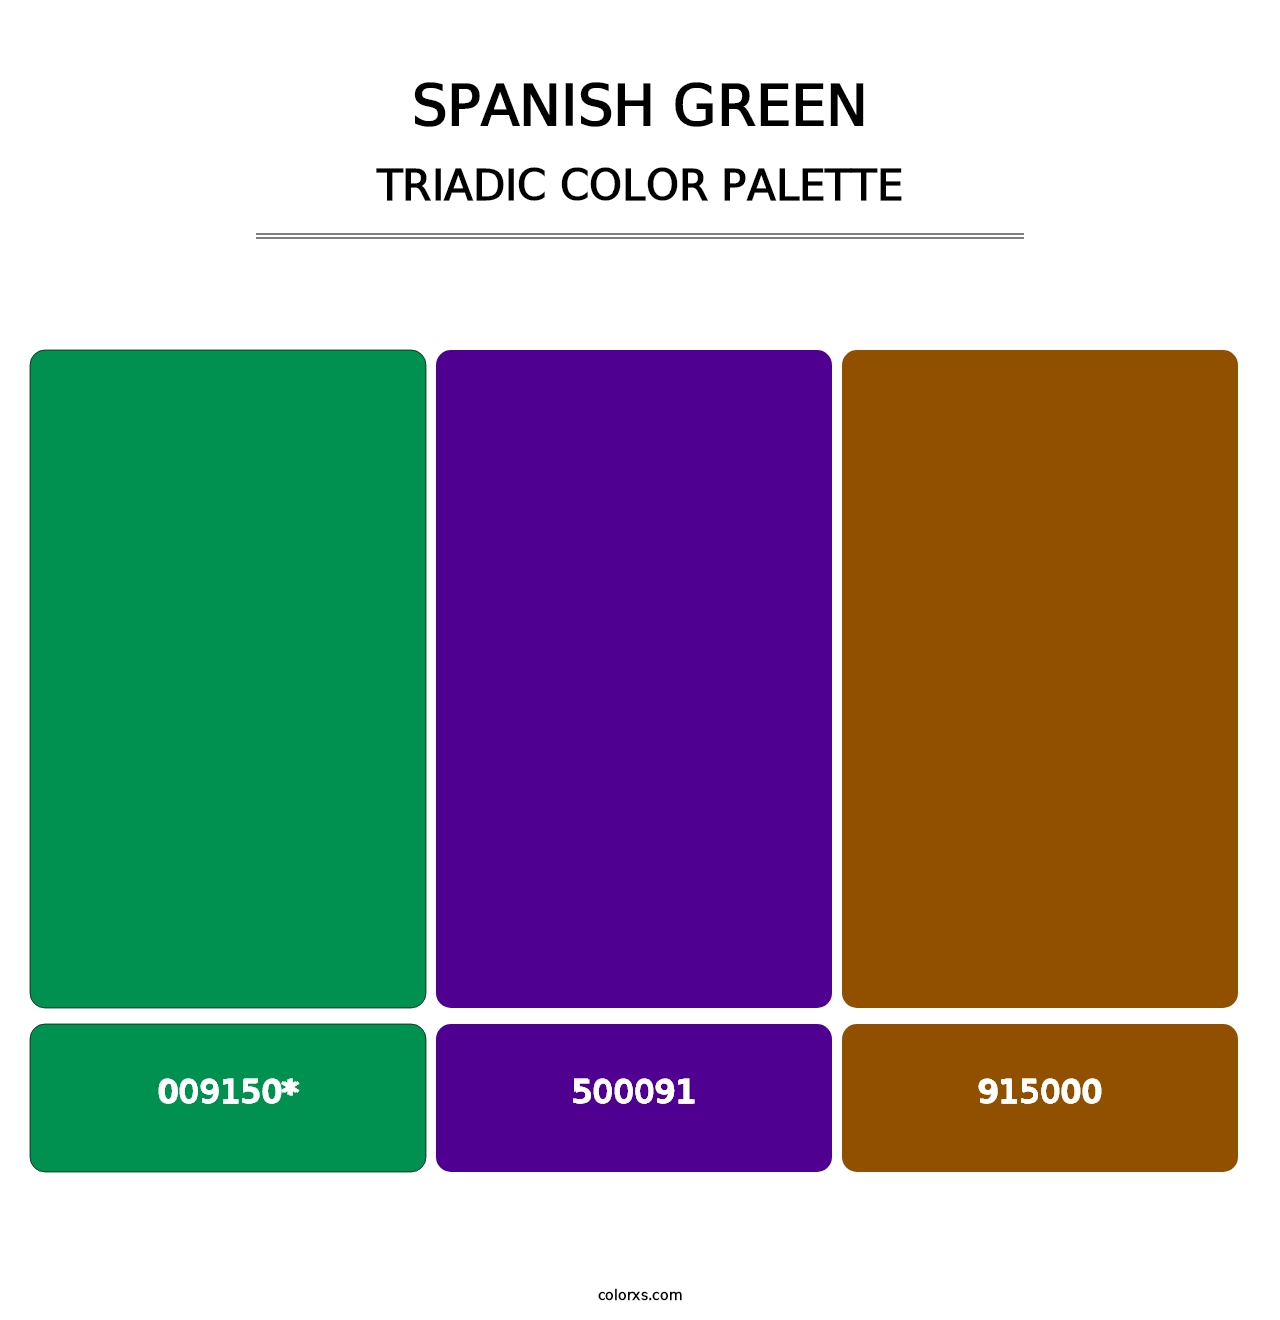 Spanish Green - Triadic Color Palette